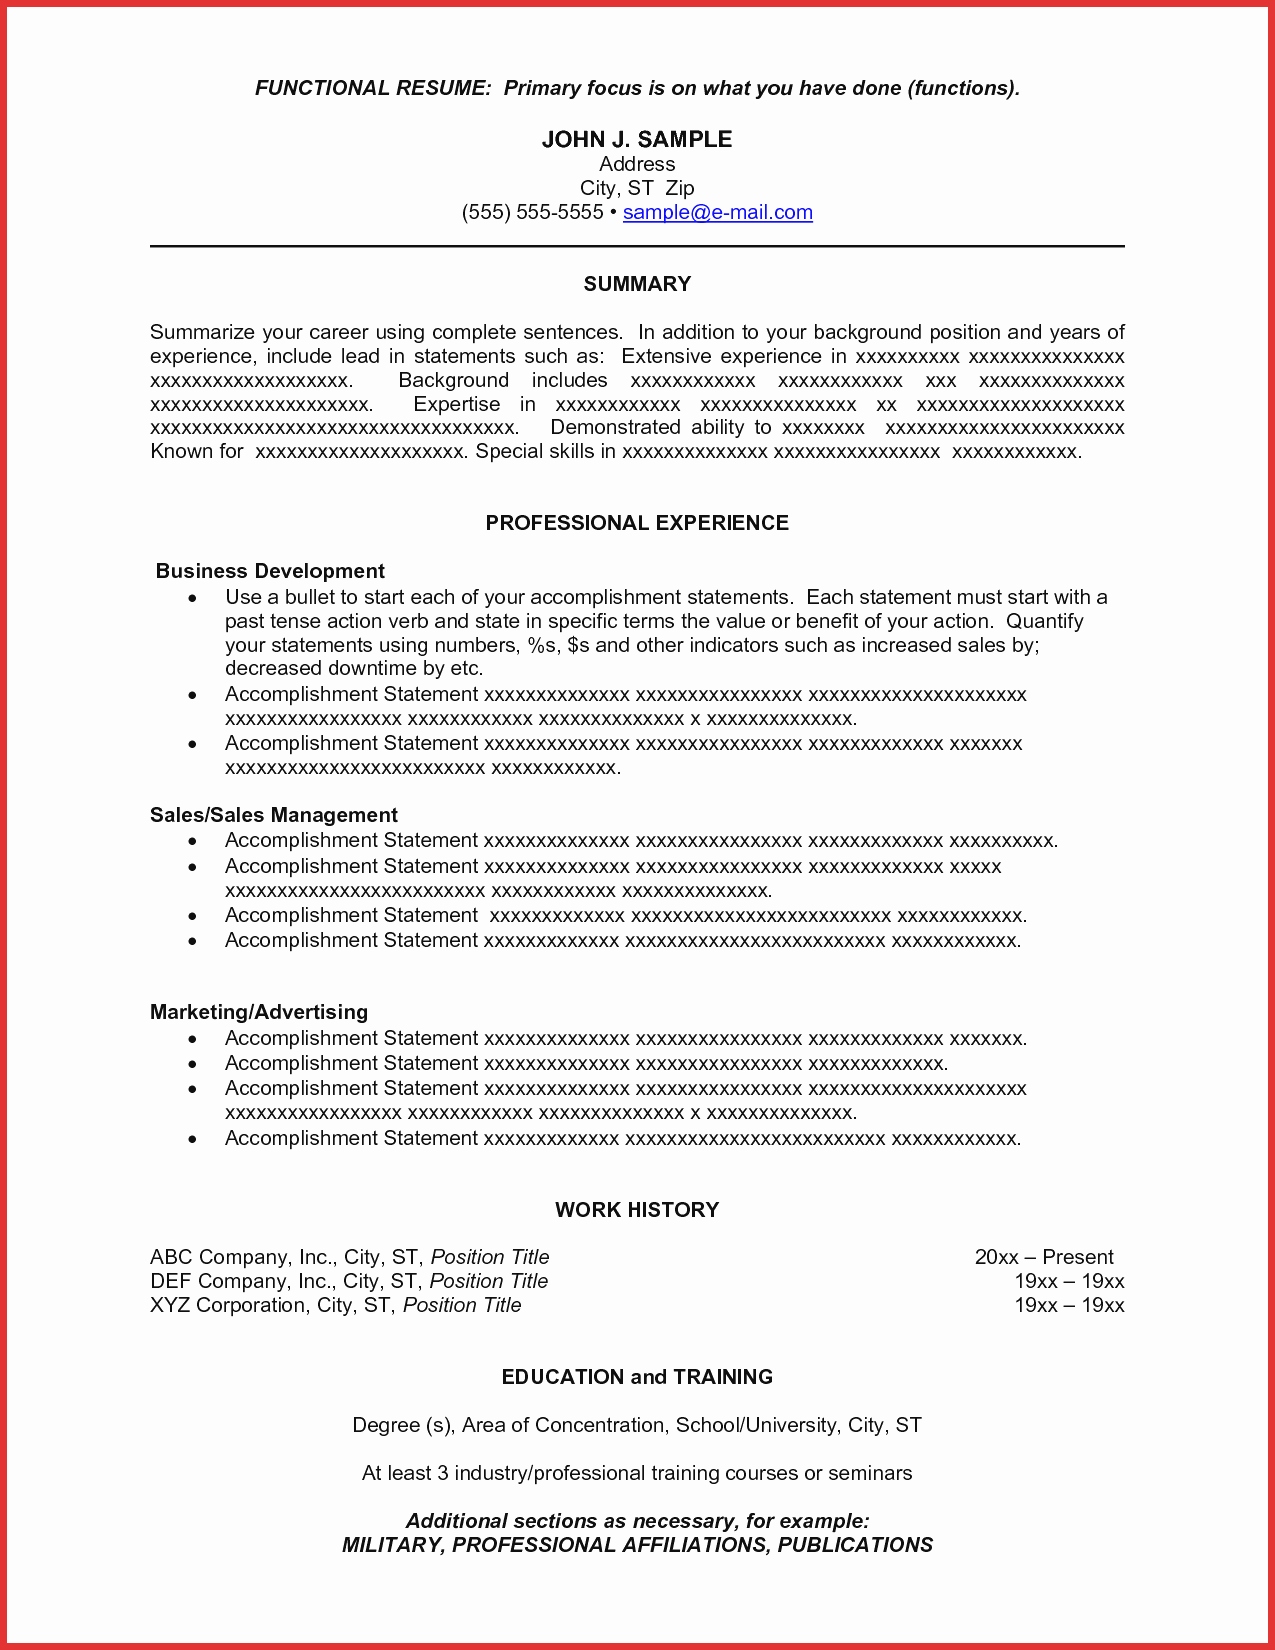 resume executive su resume summary statement examples as great